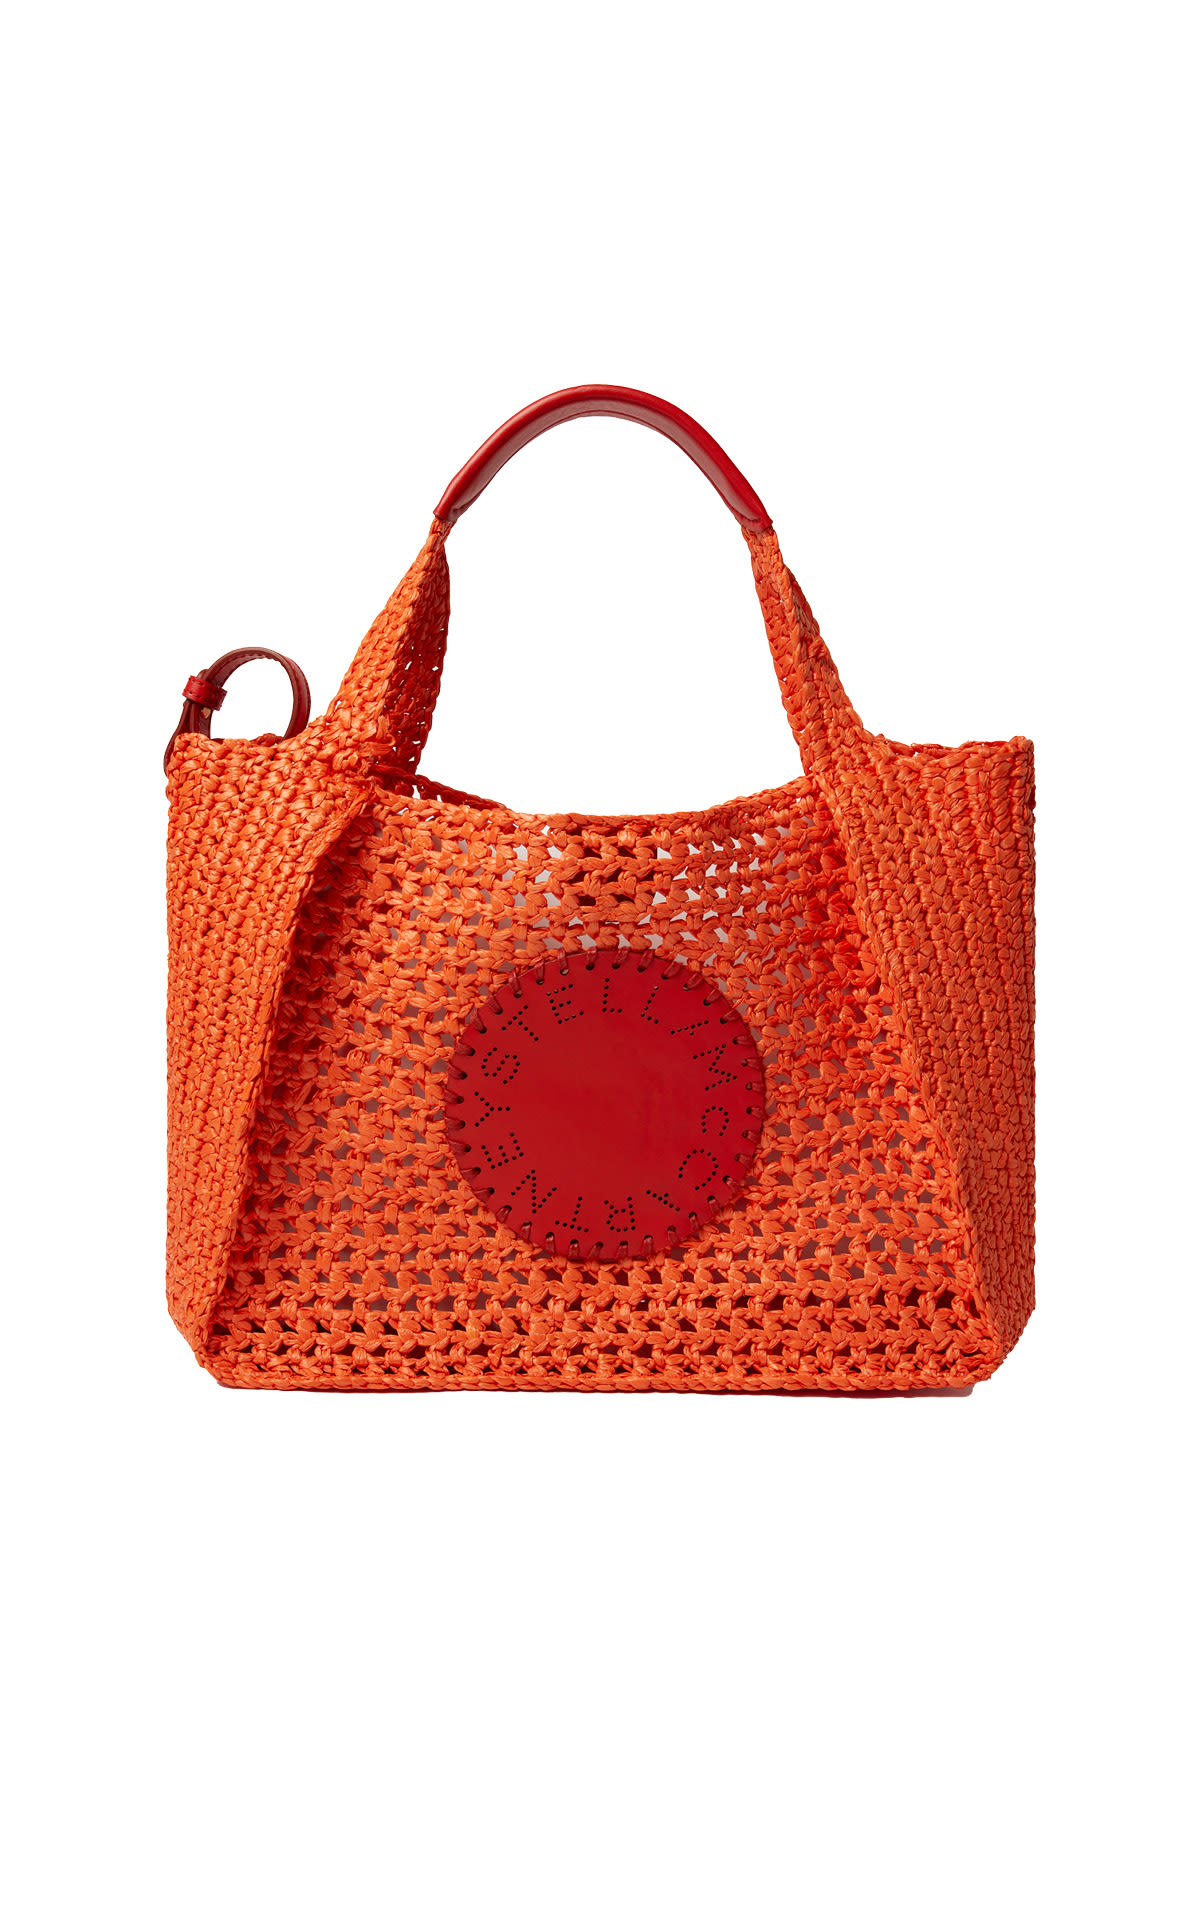 Stella McCartney Faux leather and crochet cotton bag